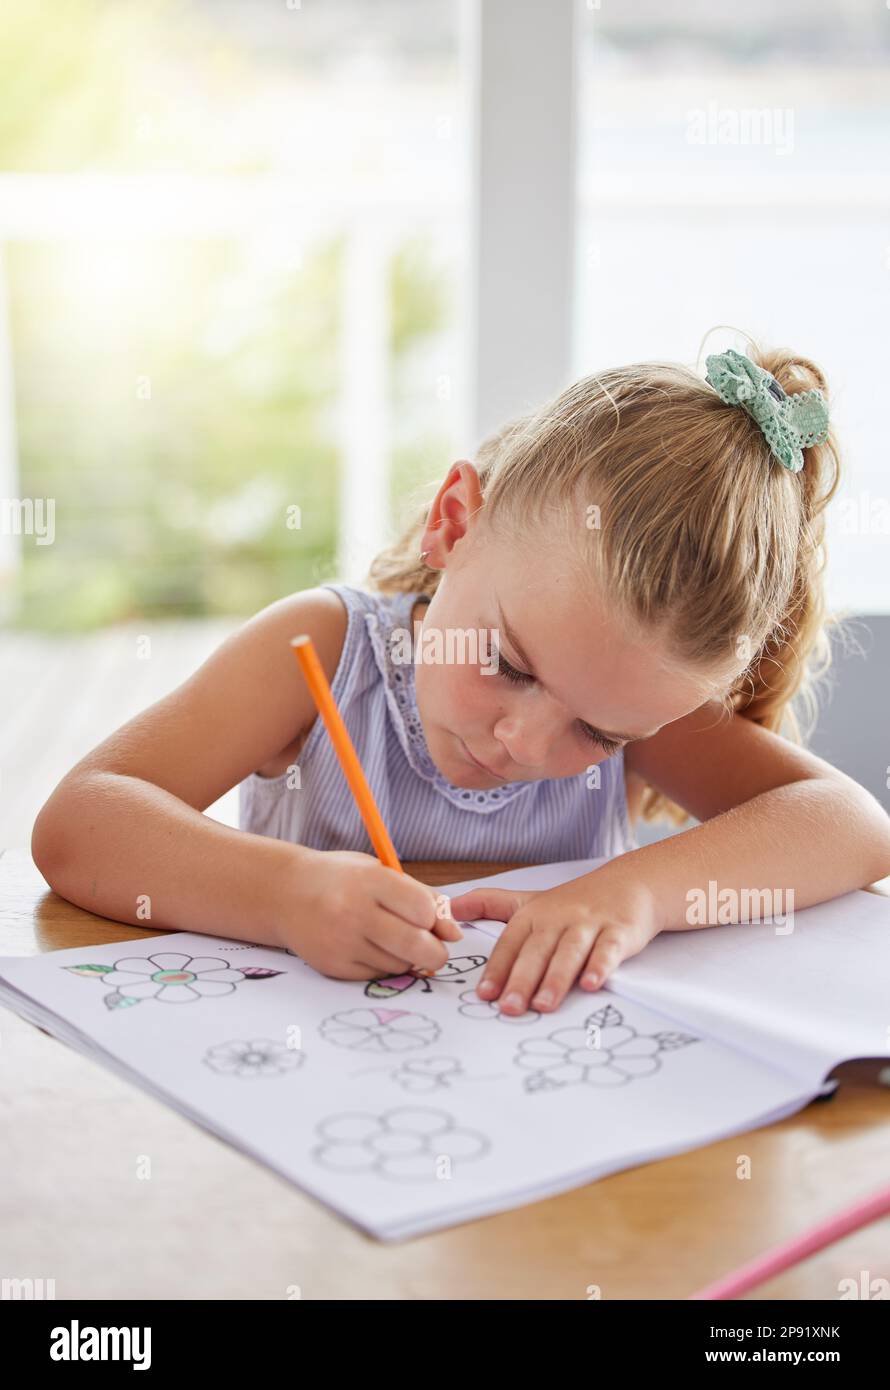 Education, art and girl learning to draw at a table, having fun with colors and paper sketch in her home. Growth, development and creative activity Stock Photo